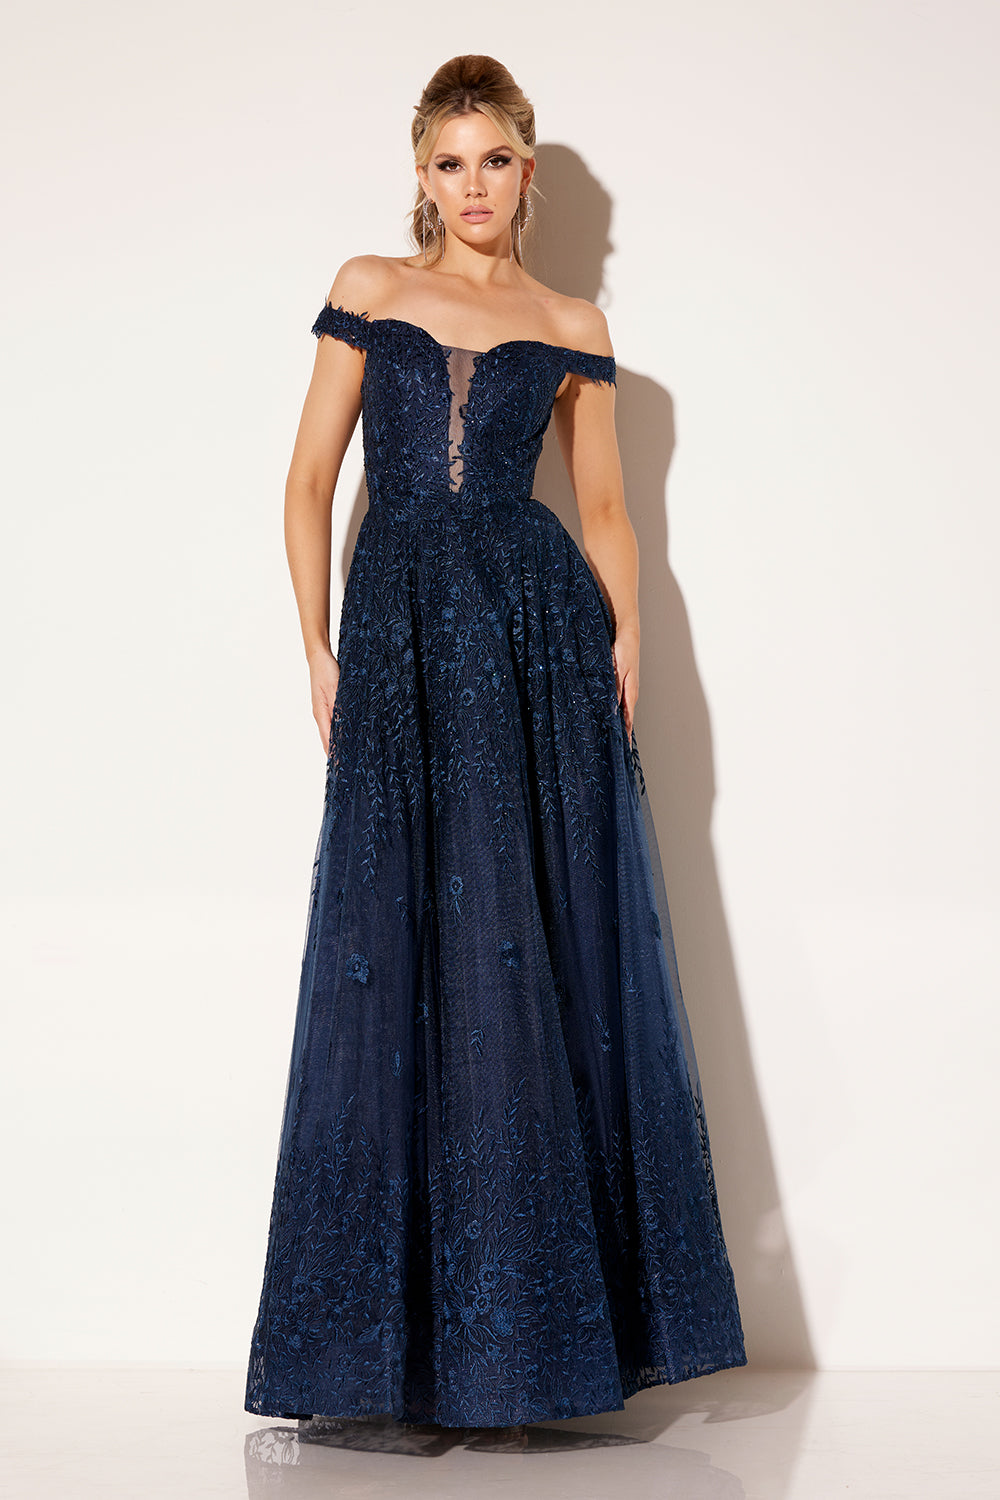 Lucci-Lu-C8090-Deep-V-Neckline-Open-Back-Embroidered-Tulle-A-Line-Navy-Evening-Dress-B-Chic-Fashions-Prom-Dress